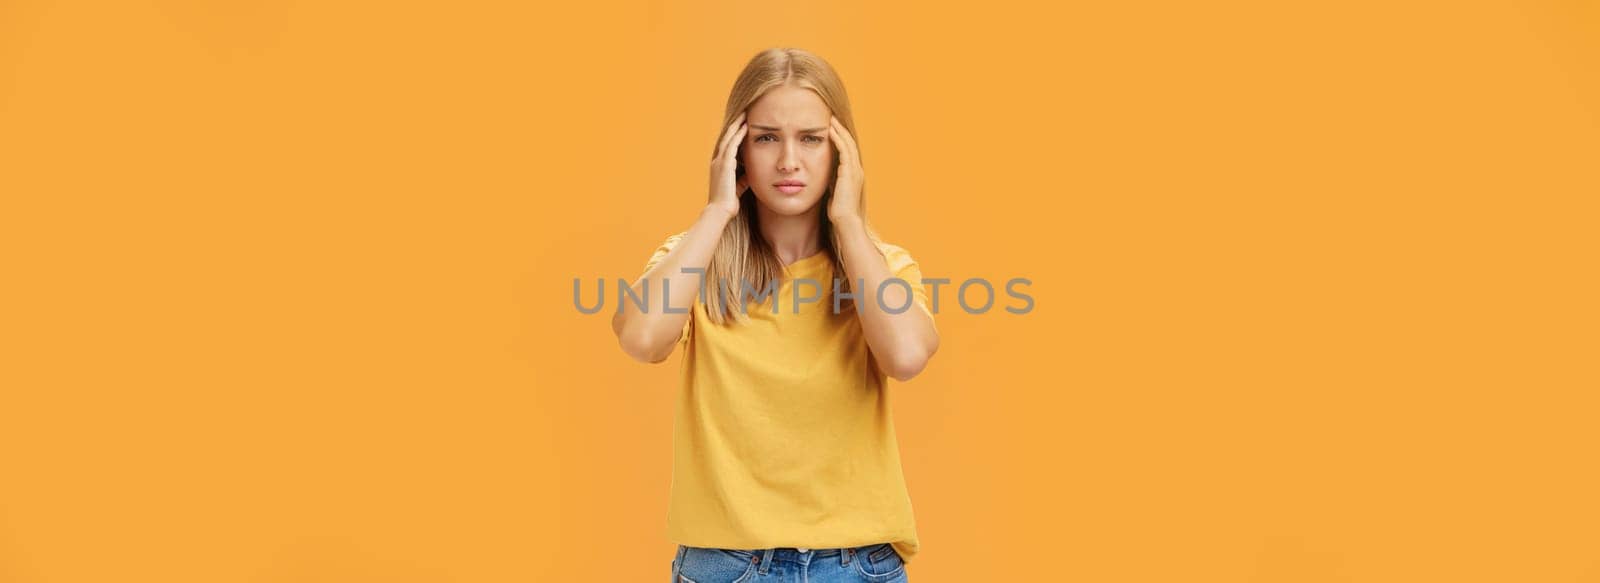 Portrait of drained sad young woman with tanned skin and fair hair feeling discomfort in head touching temples squinting and looking sick suffering headache or migraine trying concentrate on work by Benzoix